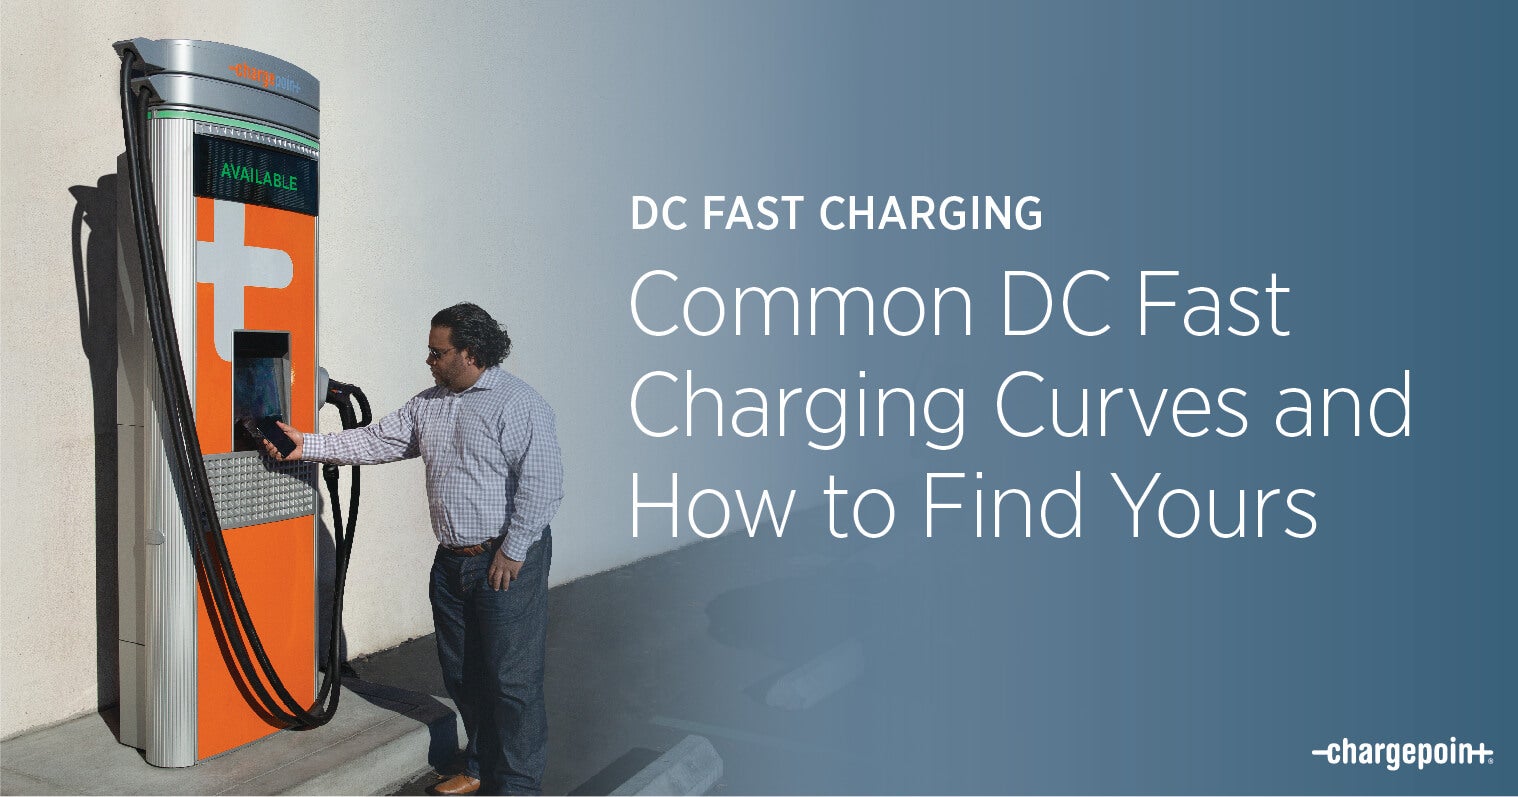 Common DC Fast Charging Curves and How to Find Yours